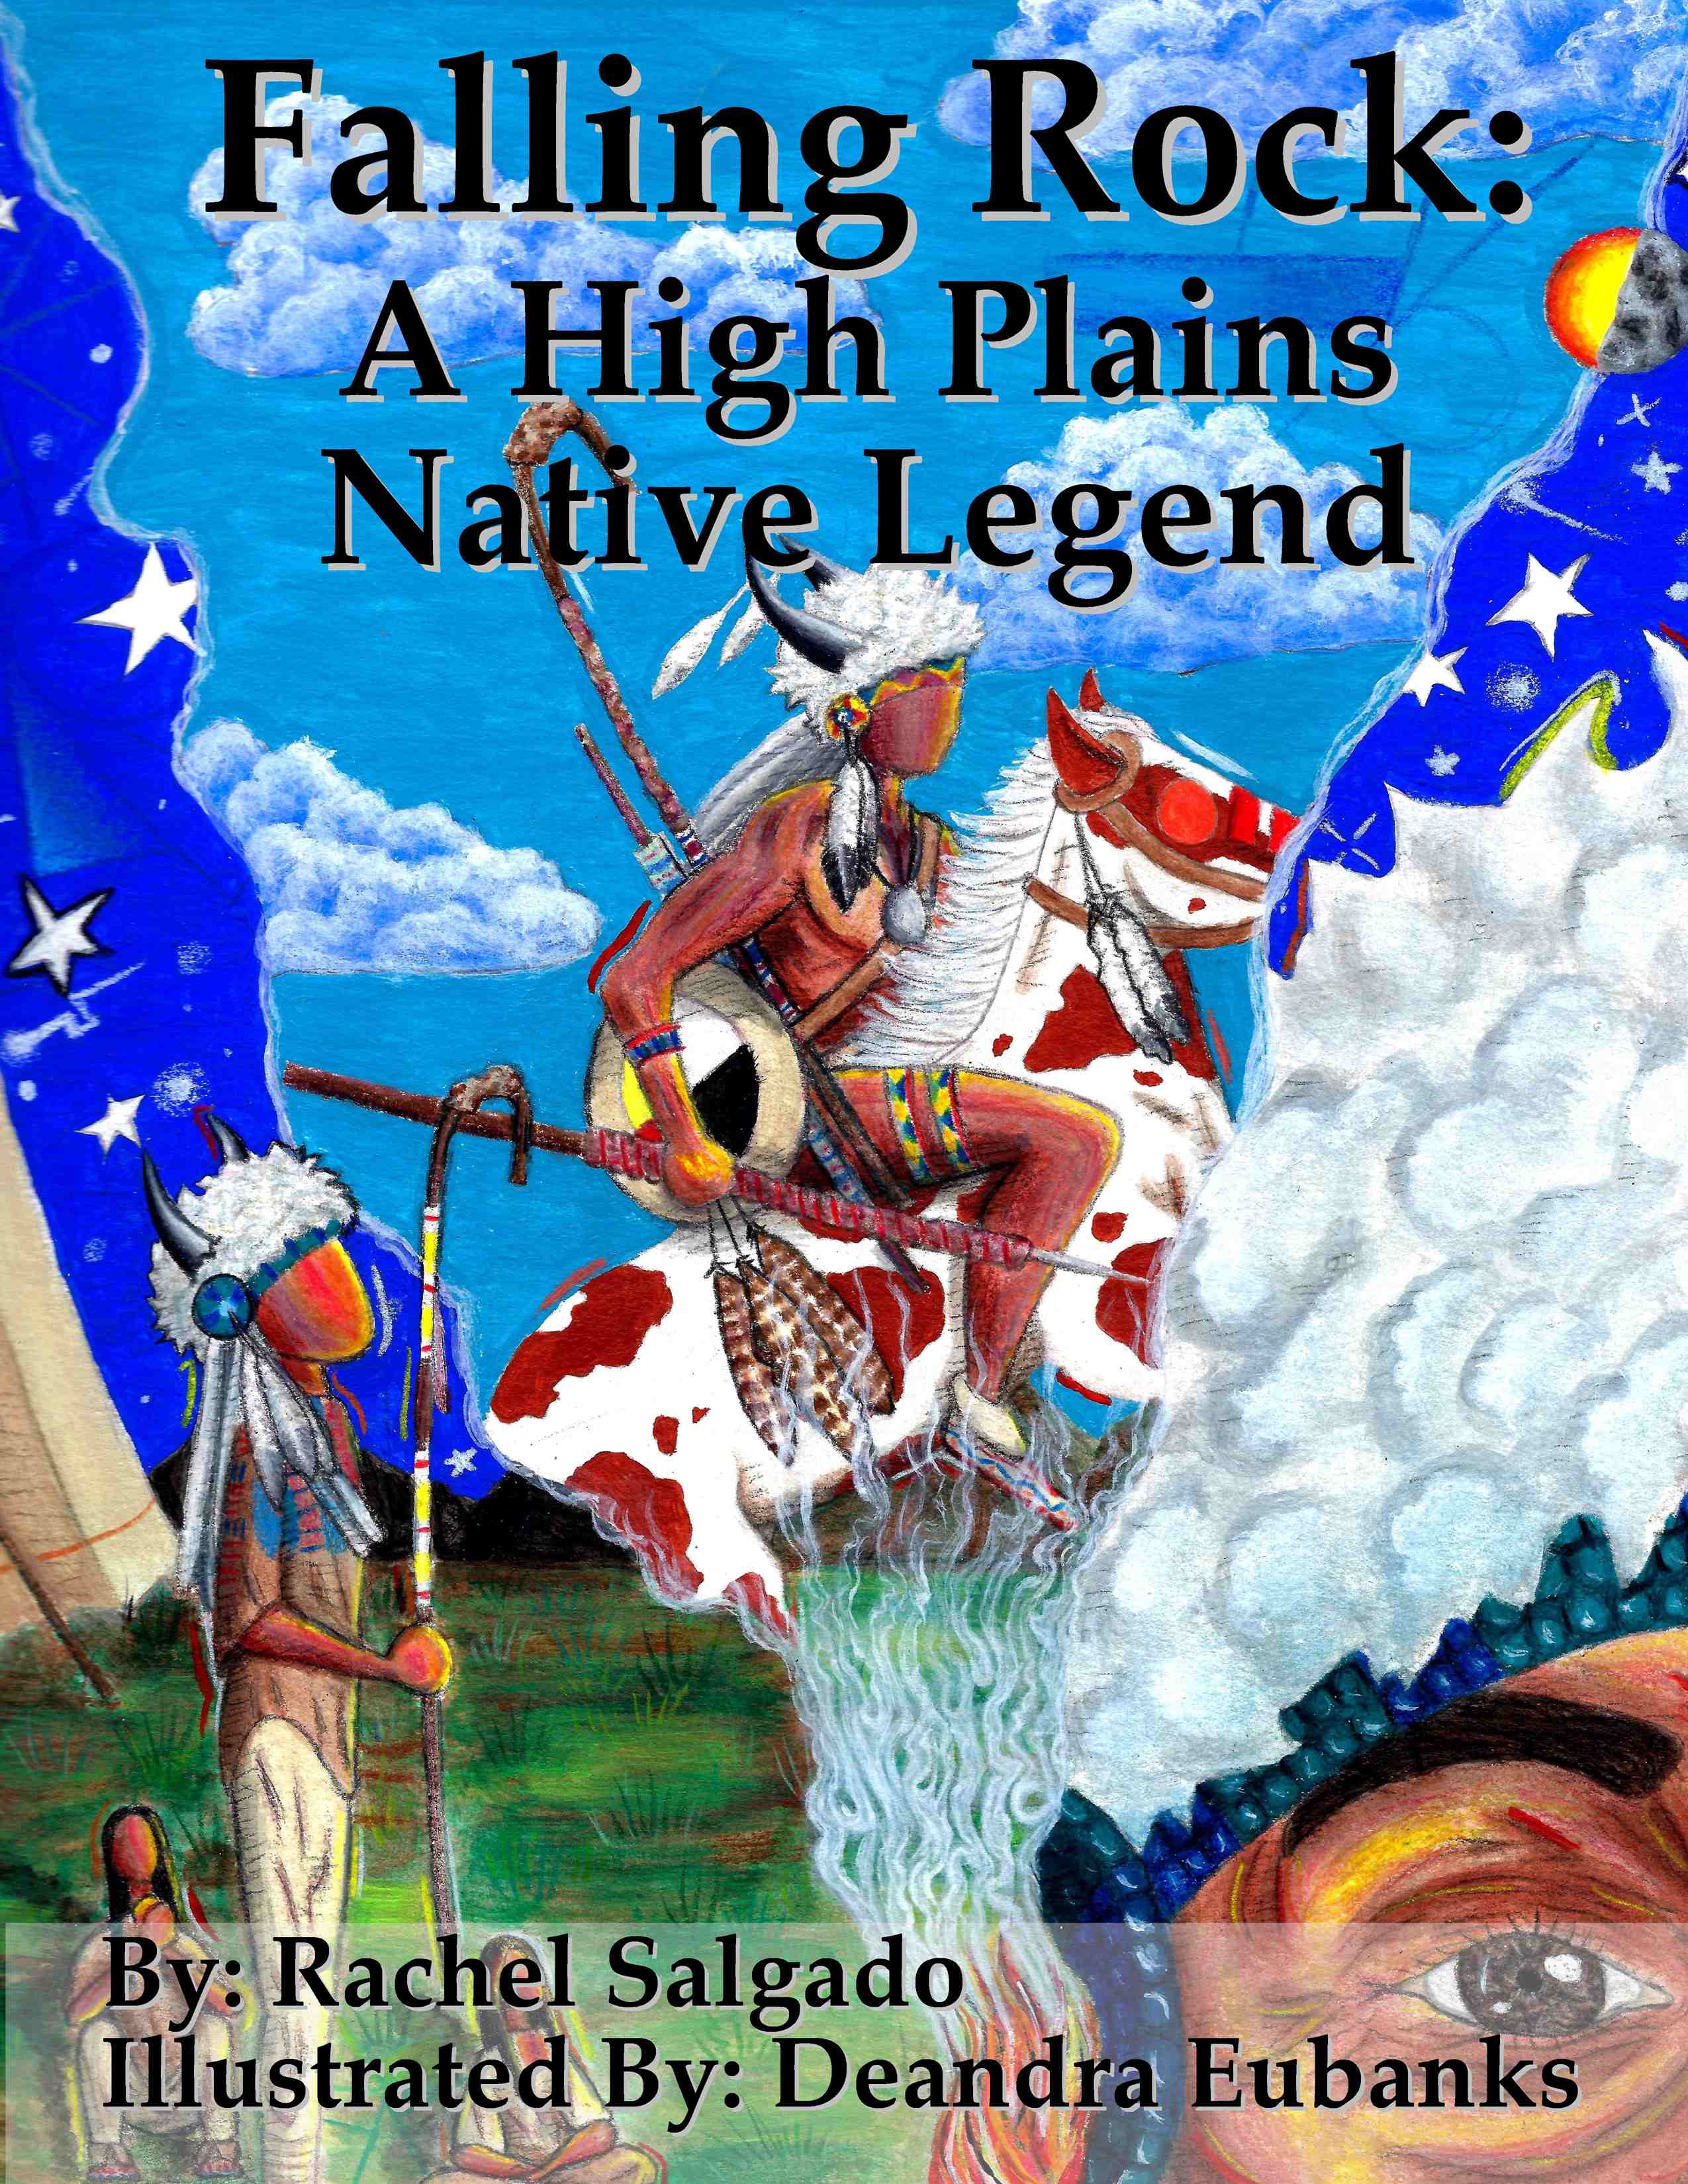 Homestead House Publishing Announces Release of a New Colorado Native American Children’s Book That Captivates the Mind and Eye